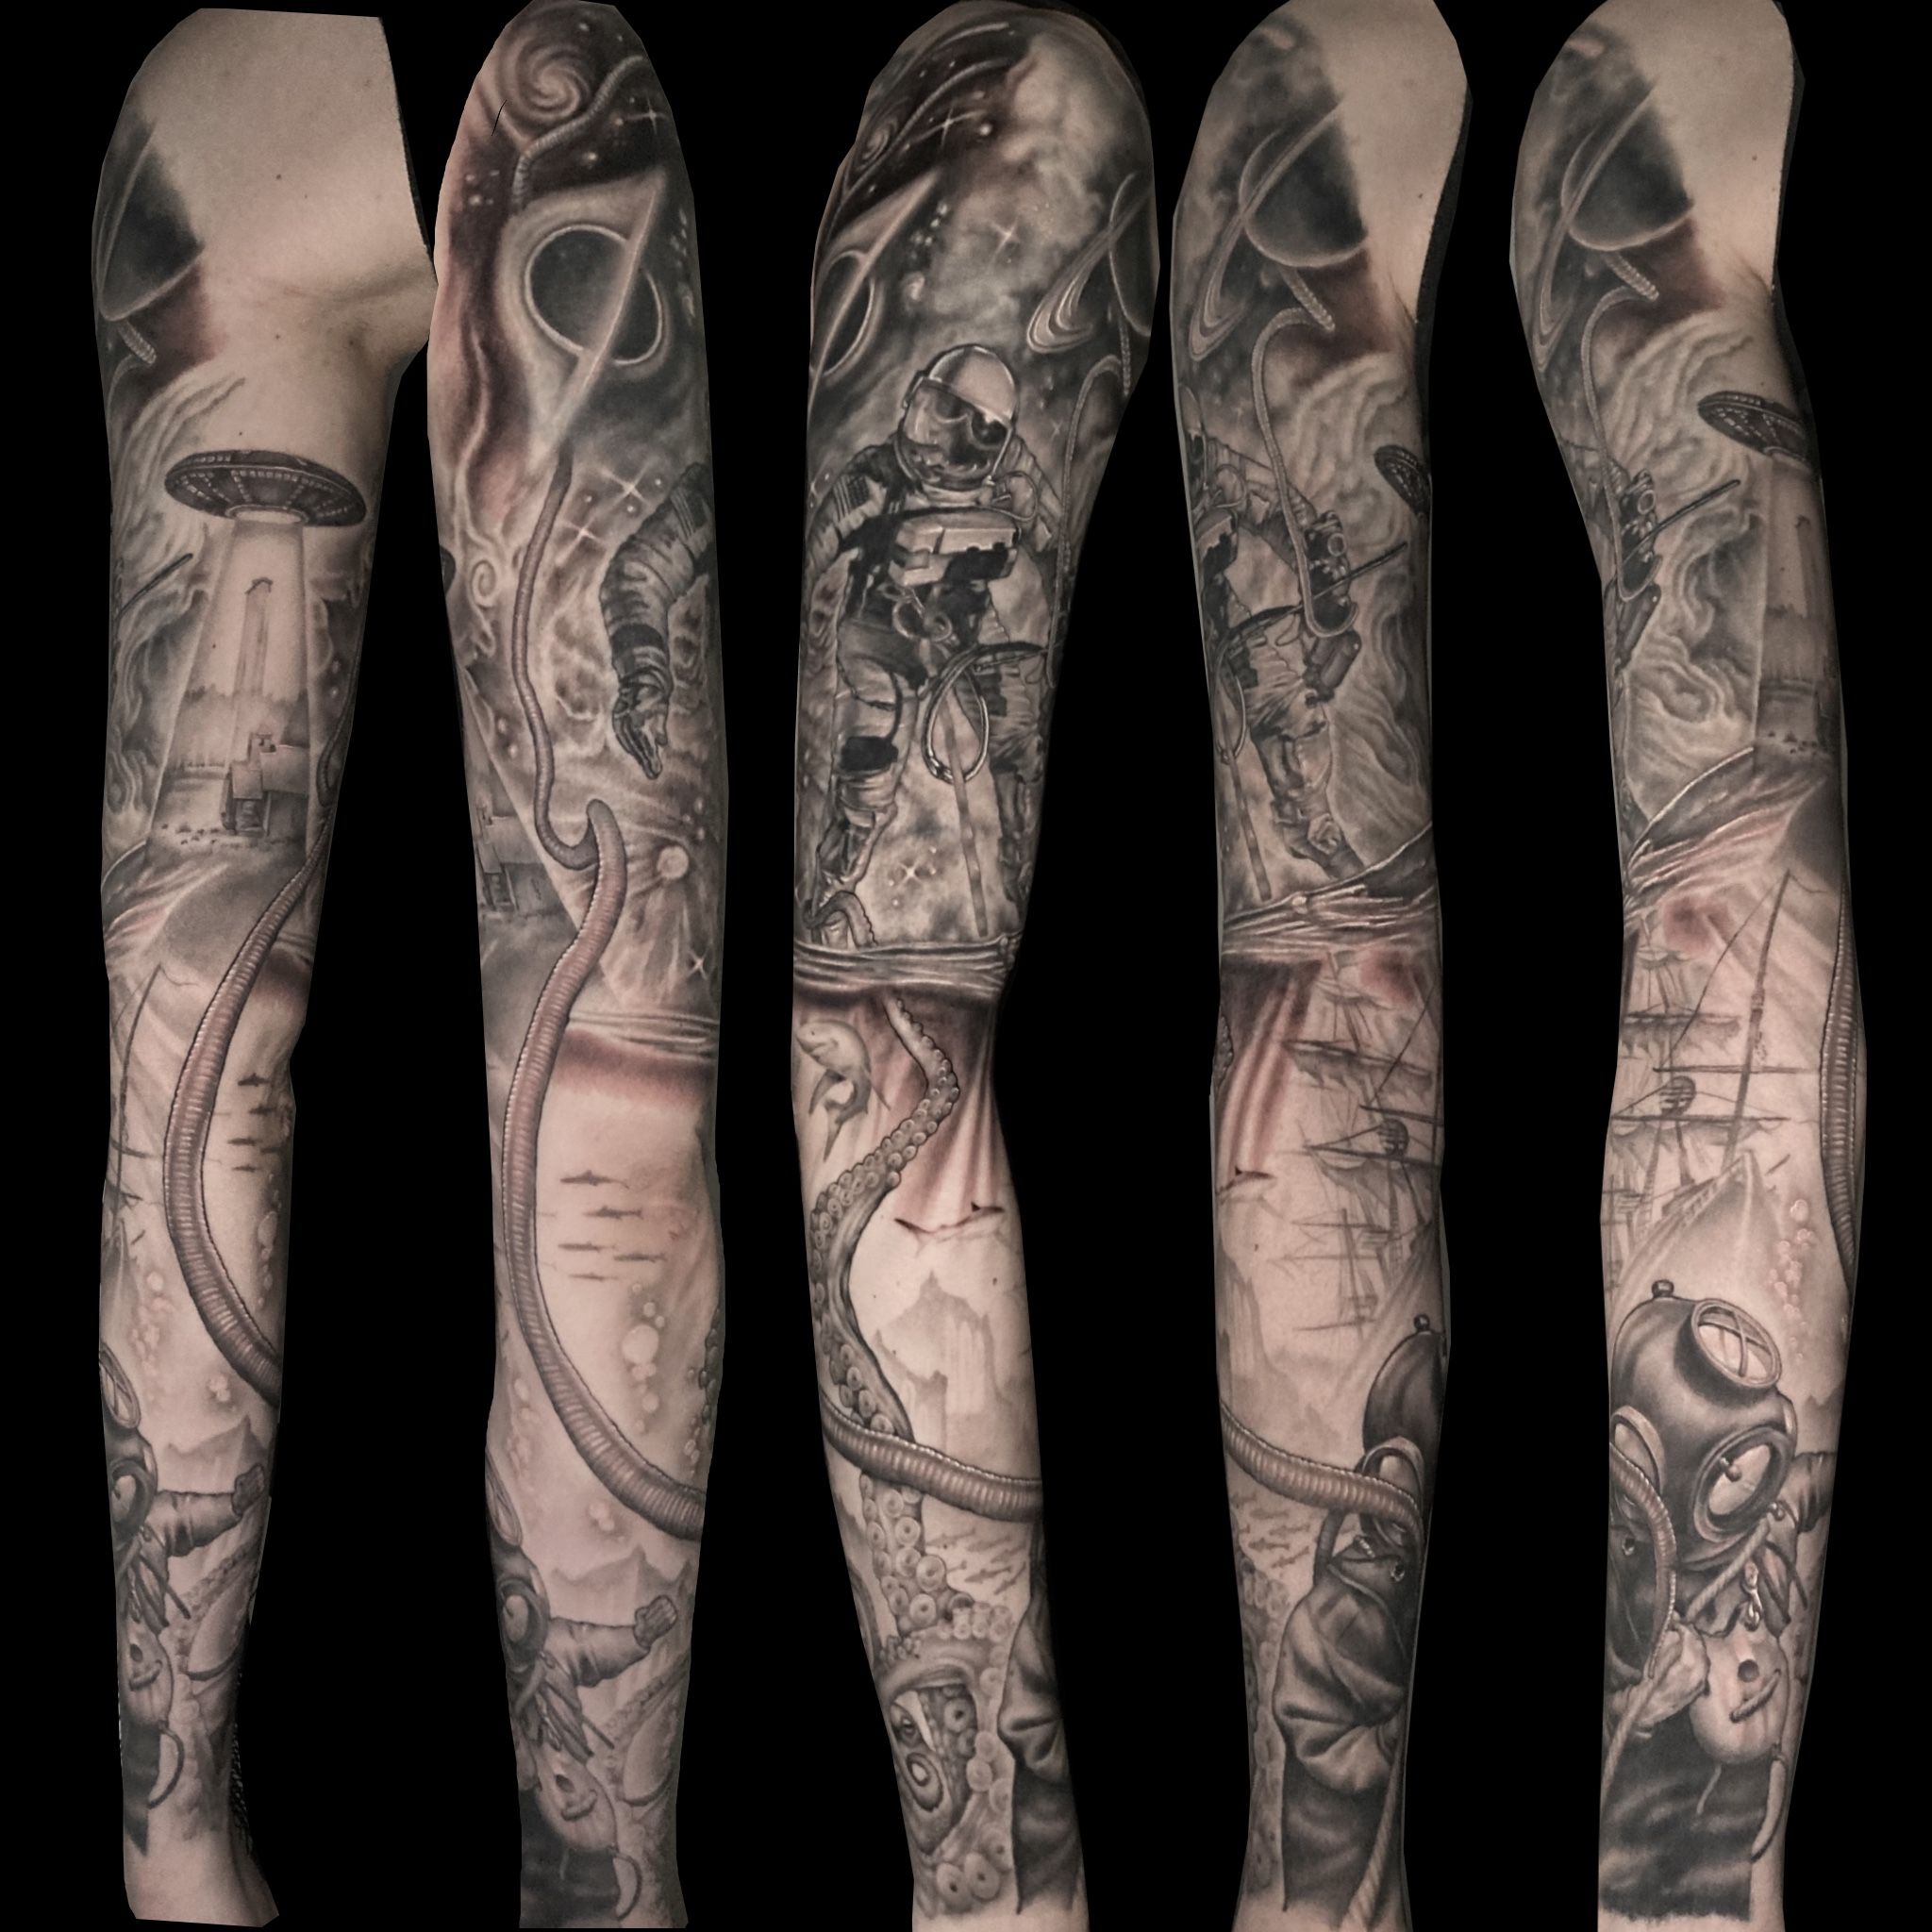 Create a unique sleeve tattoo design that reflects my diverse interests and  experiences. Incorporate elements of